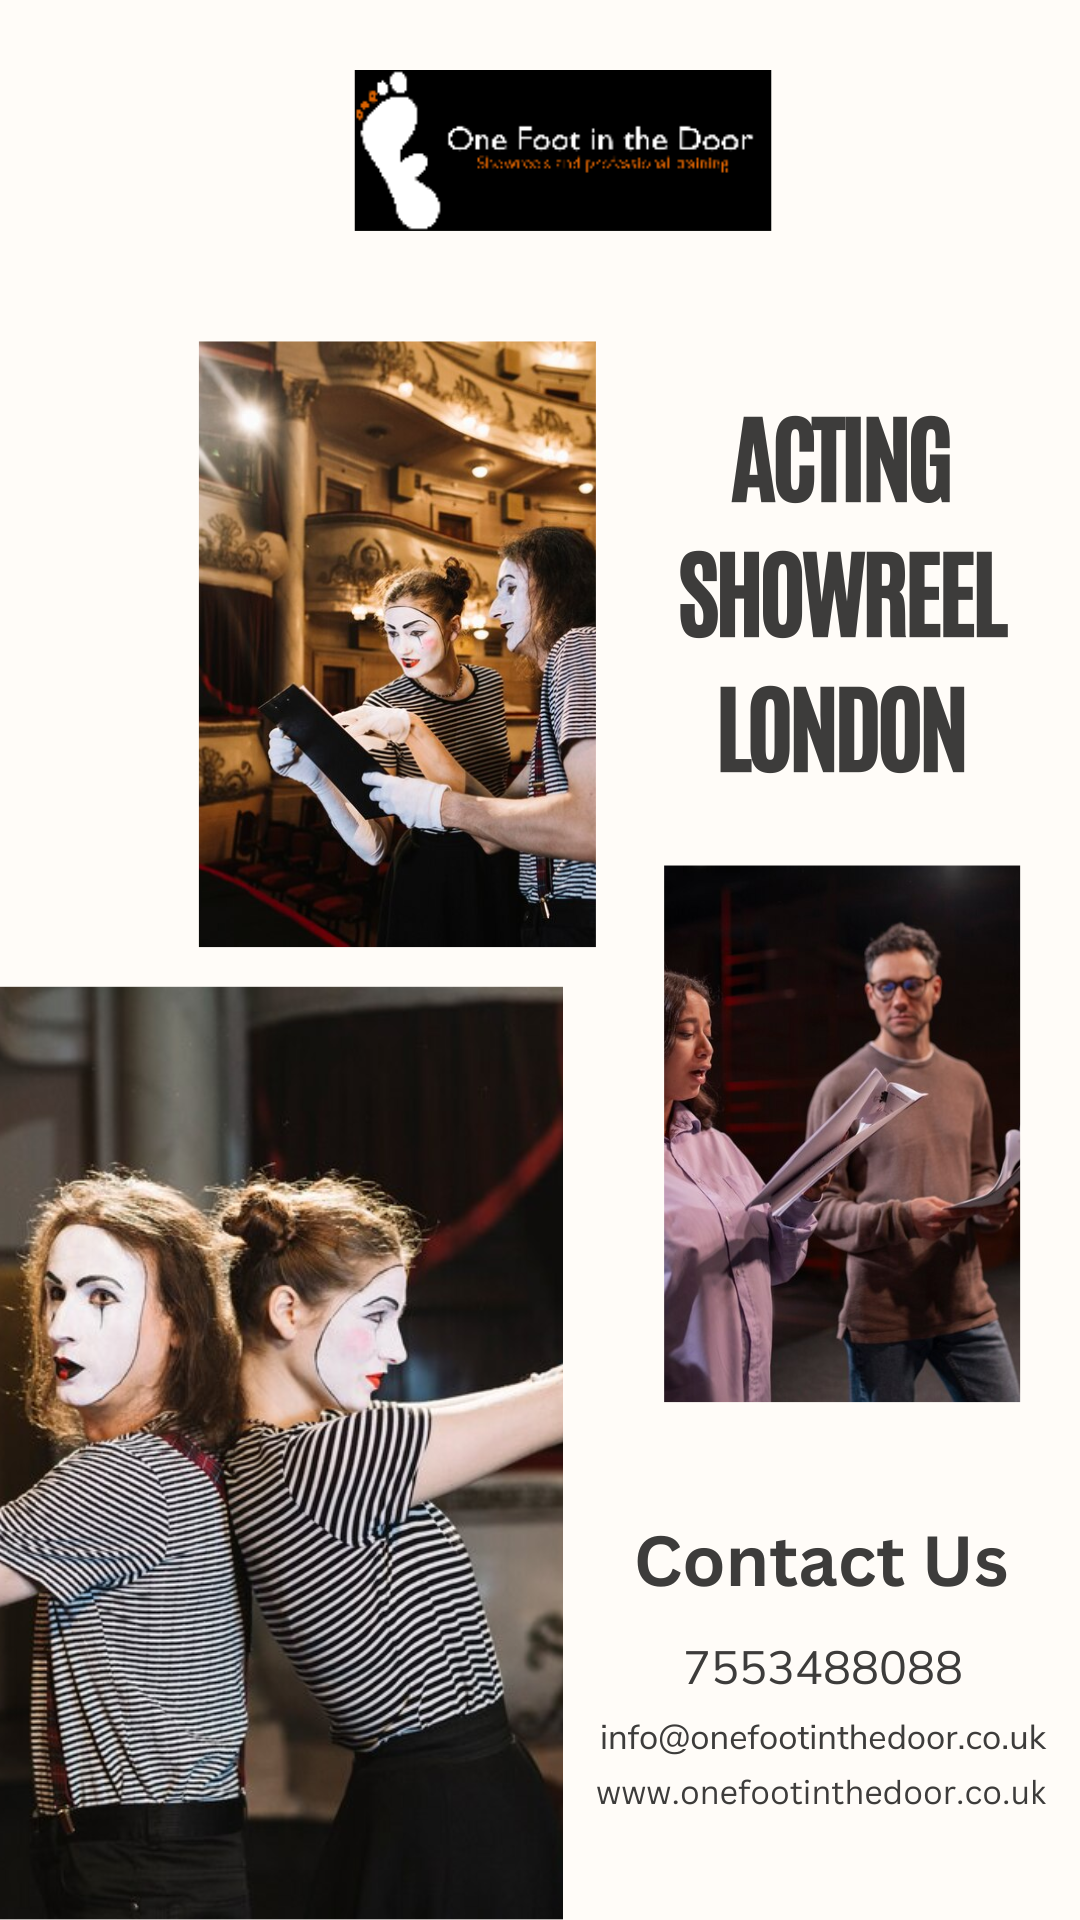 Why London Actor Showreel Training and Classes Play an Important Role?